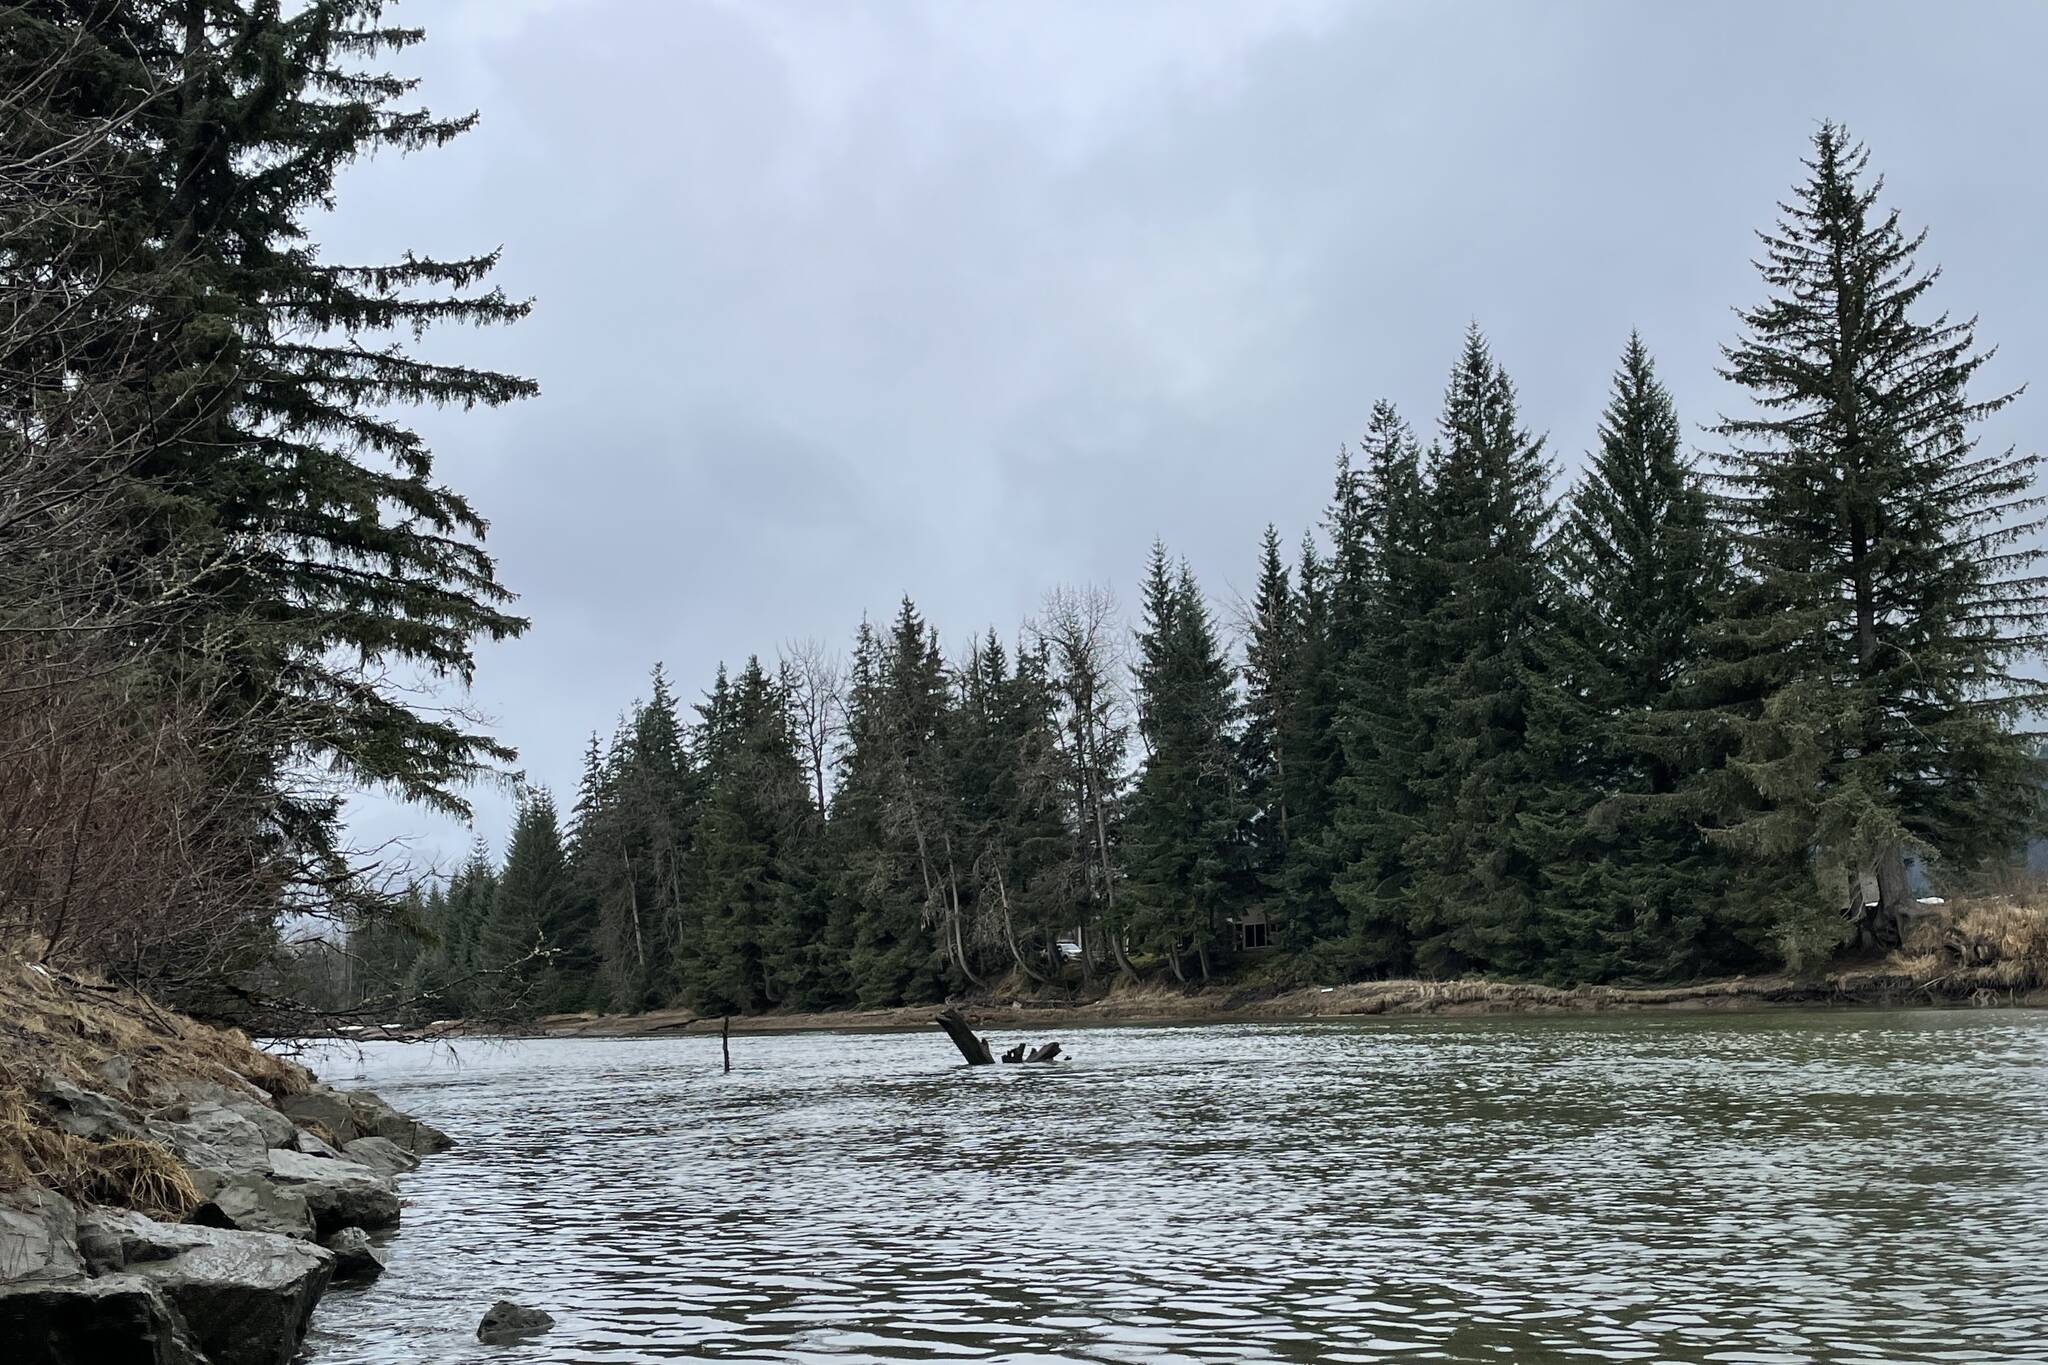 The Mendenhall River is one of Juneau’s many water systems that was affected by the drought from 2016 to 2019. (Michael S. Lockett / Juneau Empire)